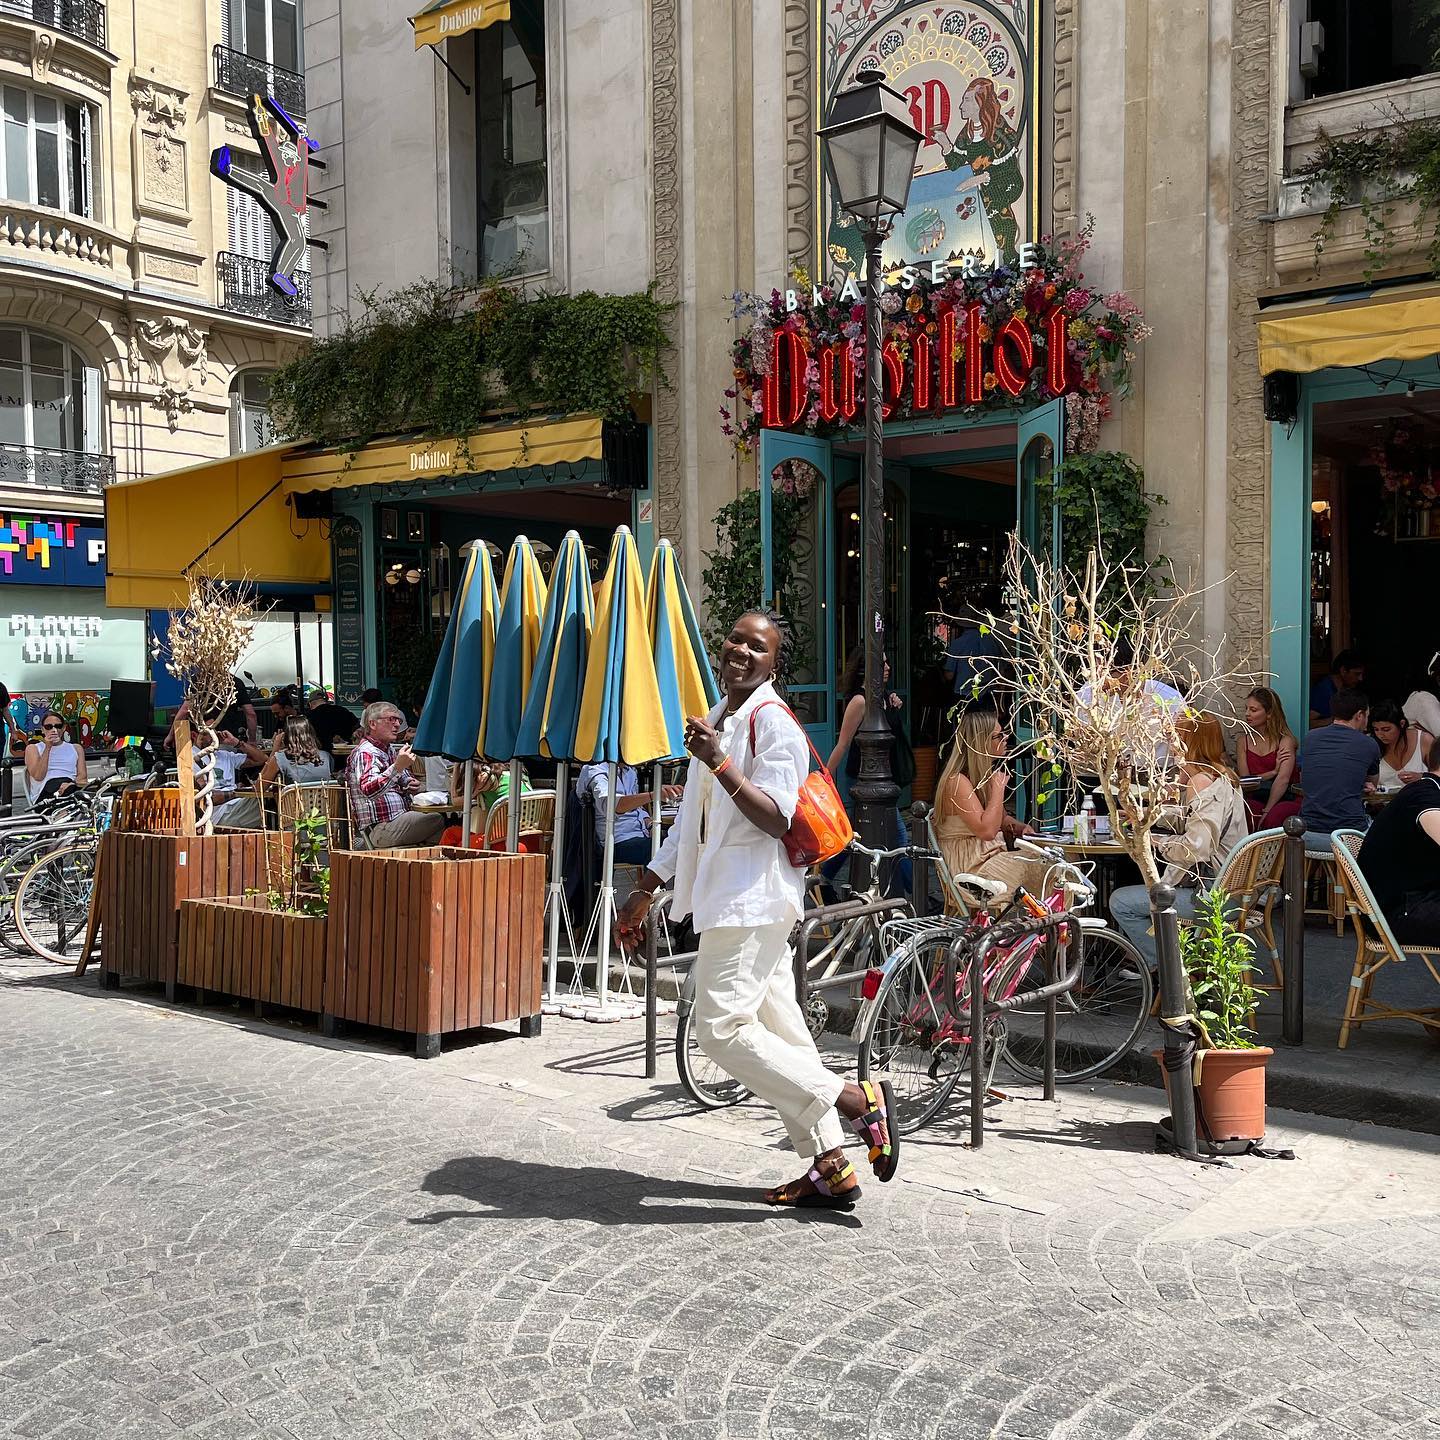 PARIS TOUR GUIDE: Two hops and a skip away from some good food, wine and coffee 🍷☕️🥖🇫🇷 - if you want to have a local guide to Paris, that’s fun and informative, here I am baby. 
Let’s vibrate together for more of la joie de vivre française🌞🤗😘 #feelgoodparis #paris #myparisianlife #travelerinparis #love #parisjetaime